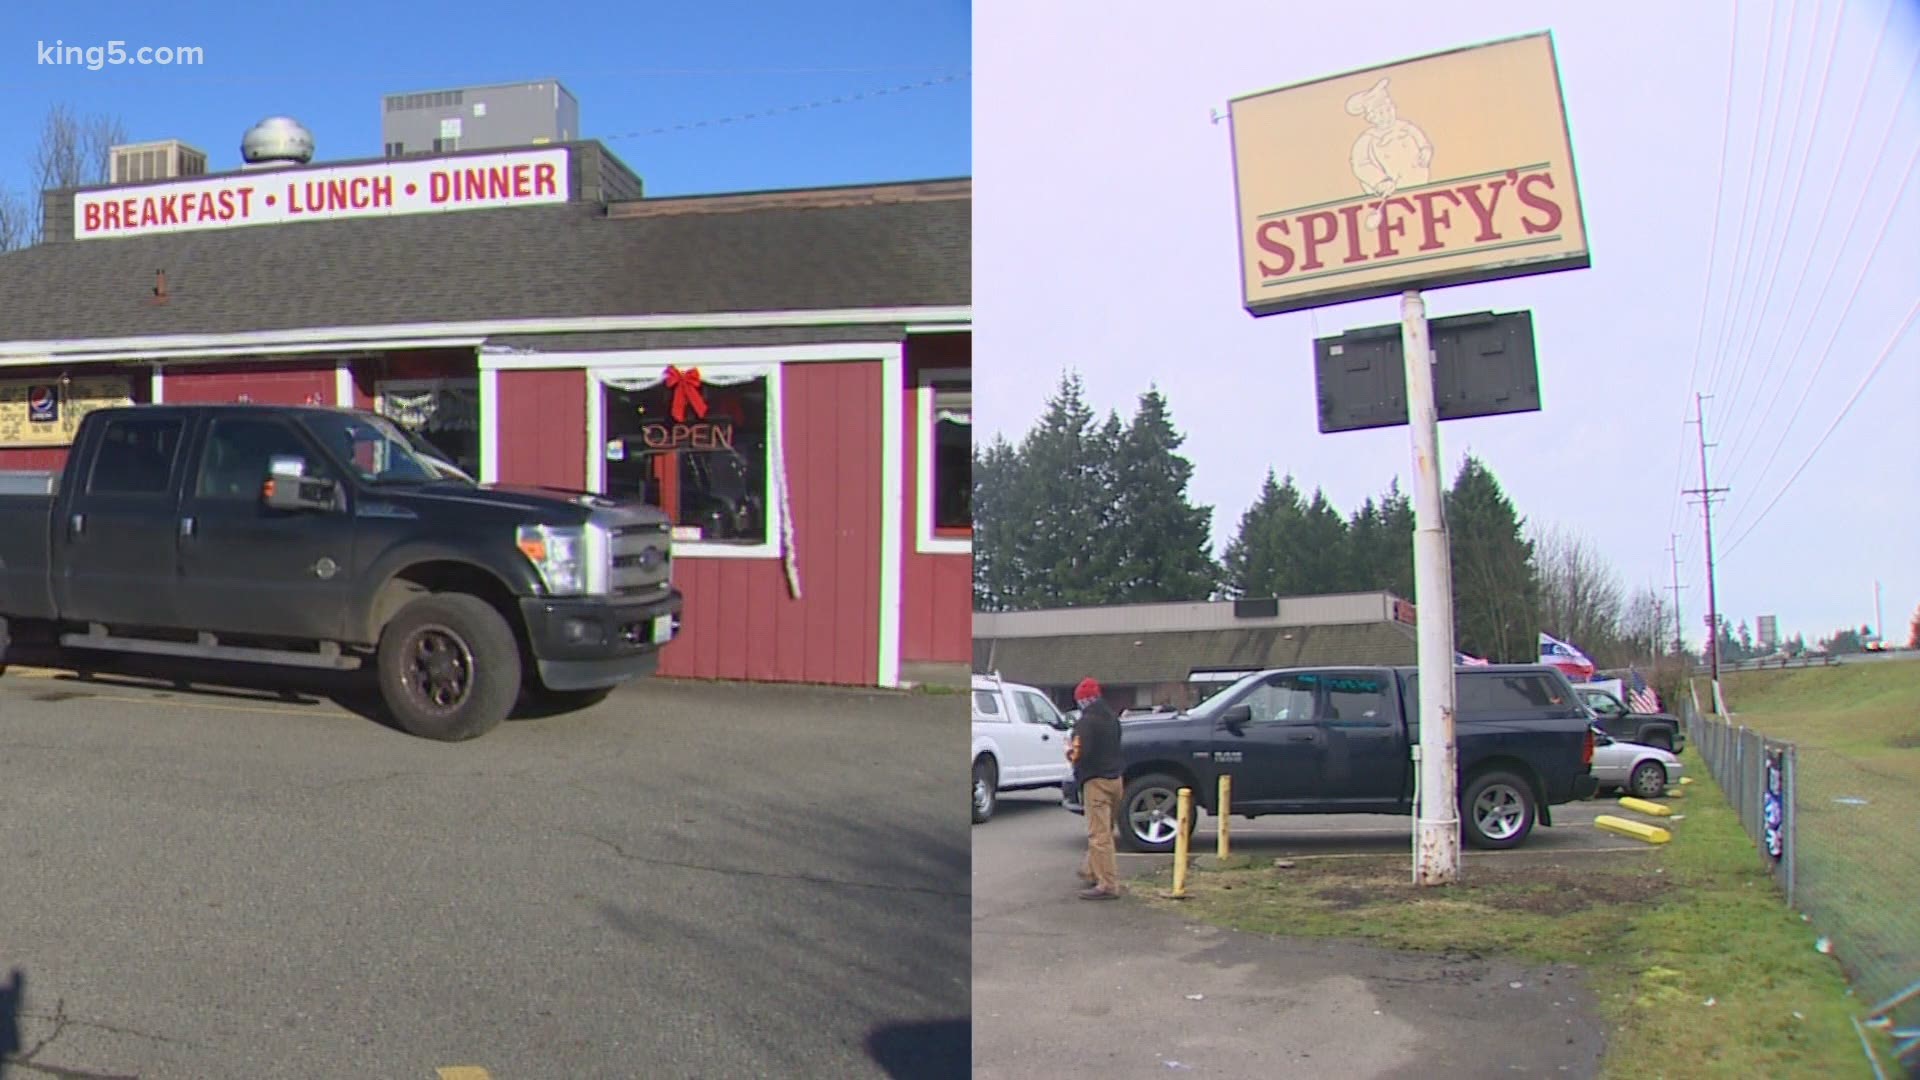 Farm Boy and Spiffy's restaurants have been fined tens of thousands of dollars for violating the state order to shutdown indoor dining to stop the spread of COVID-19